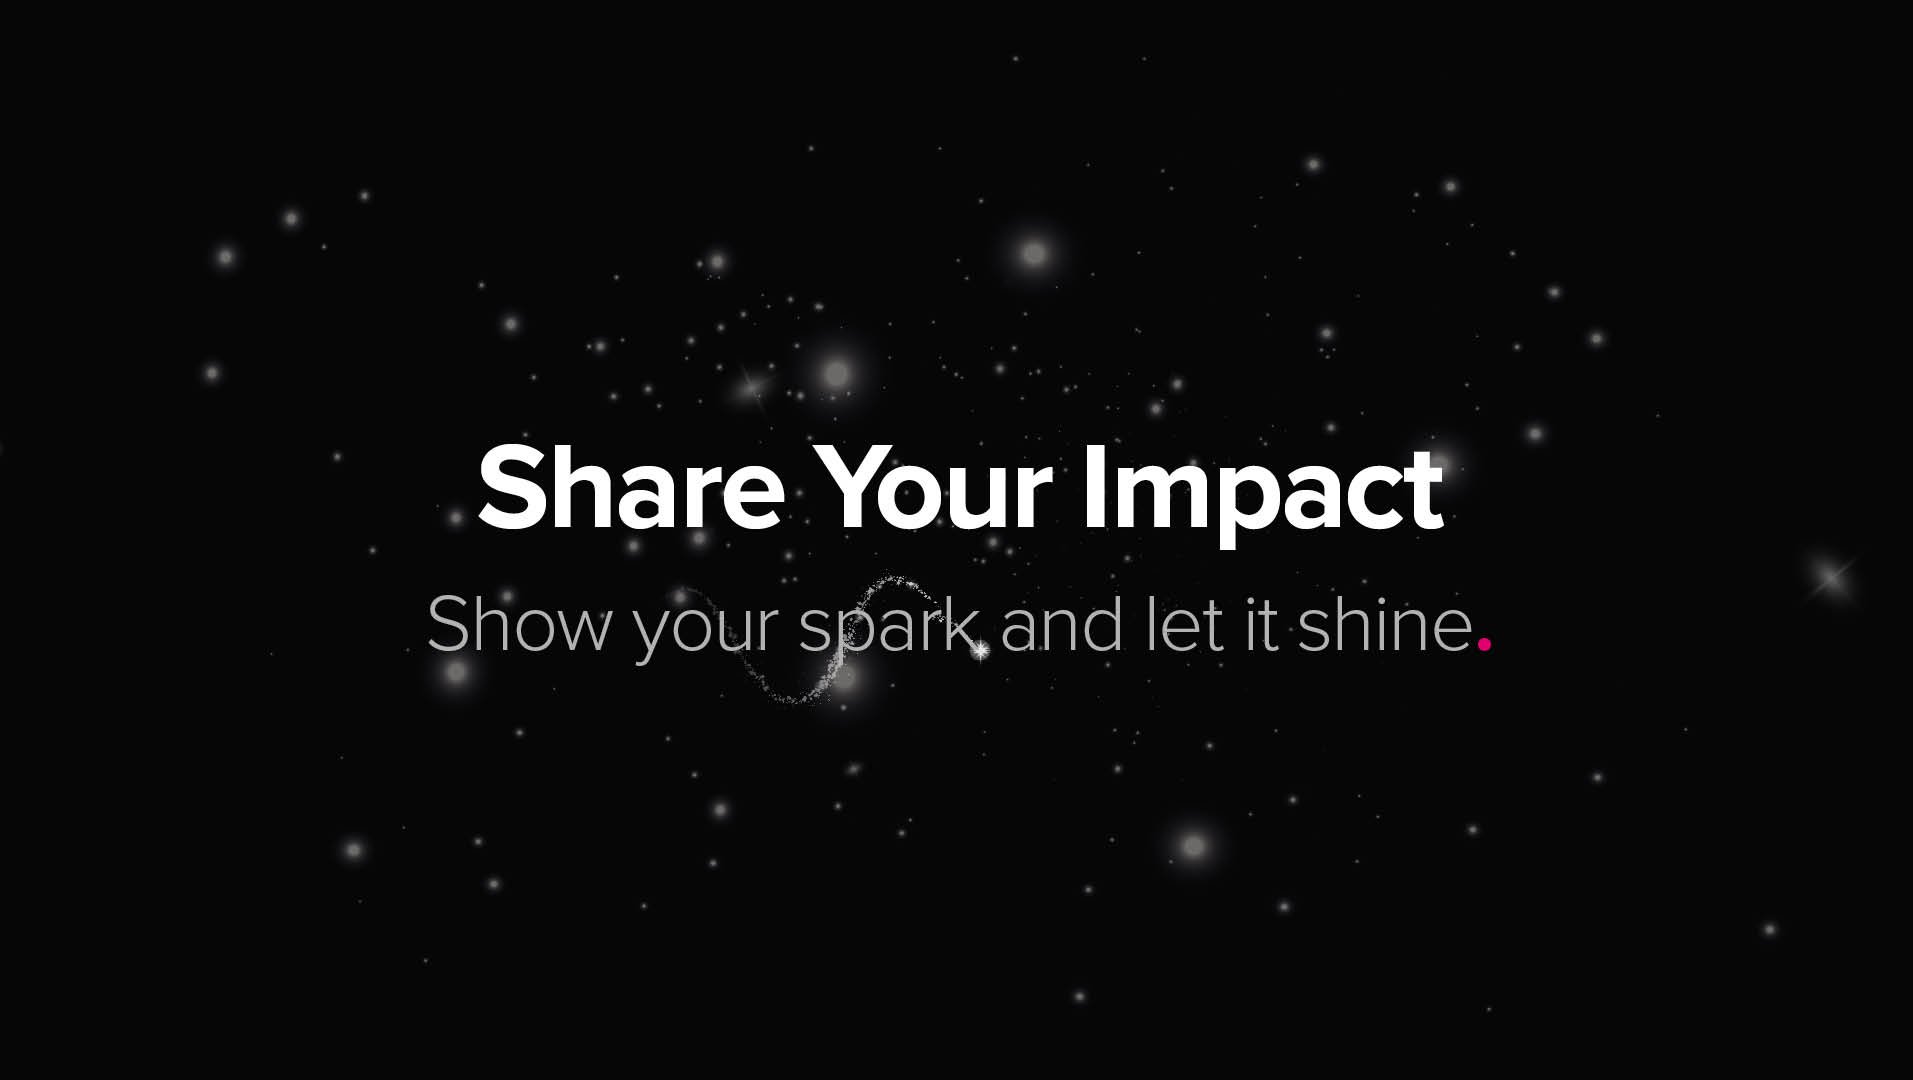 Share Your Impact